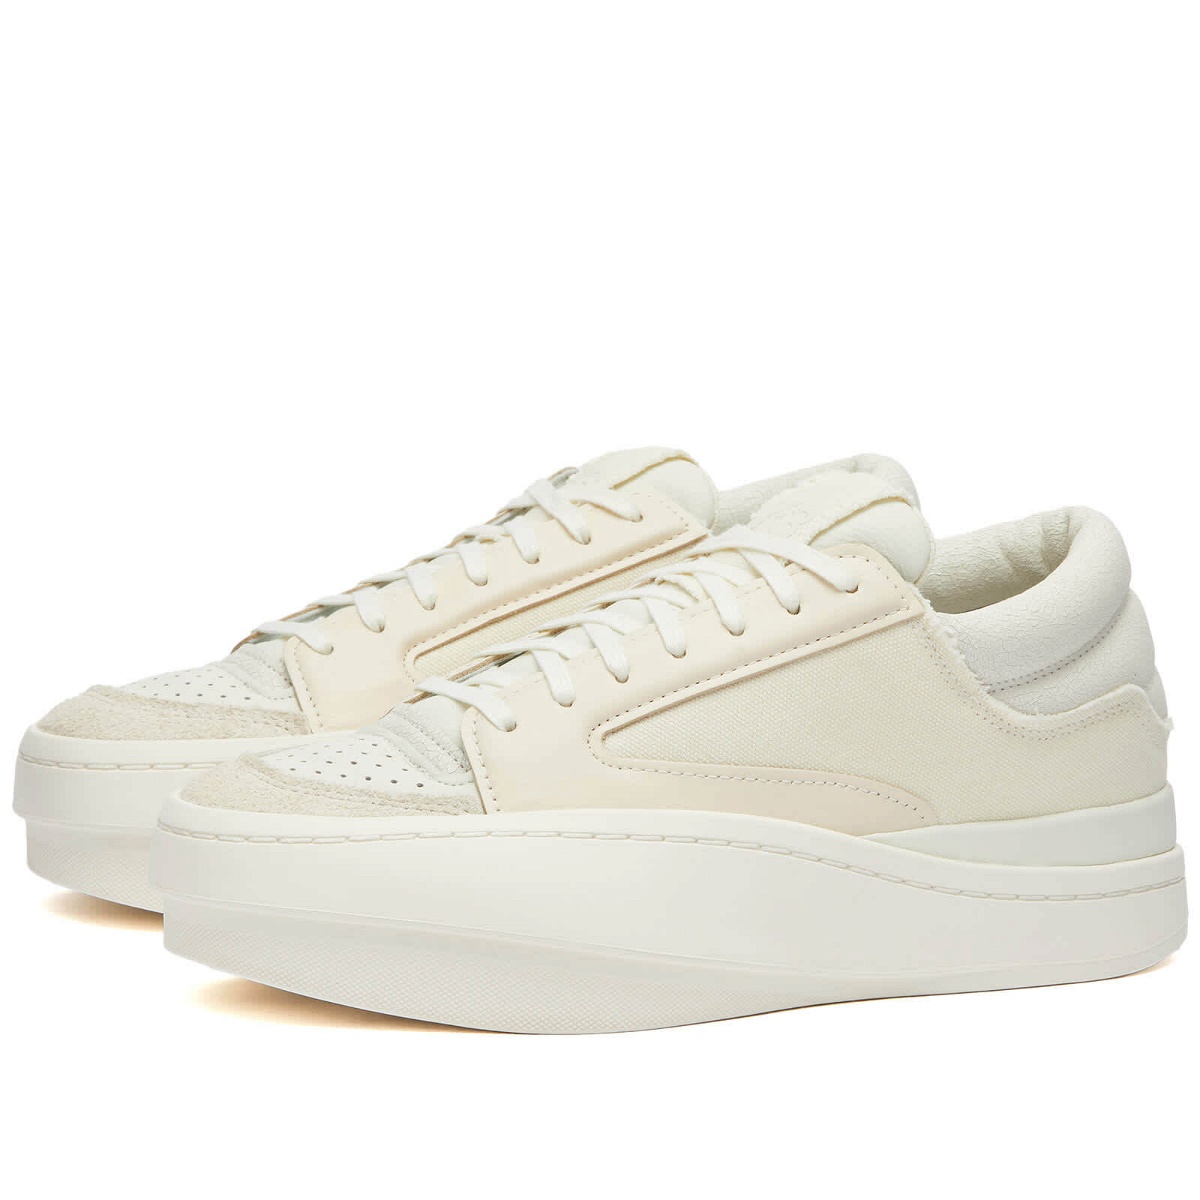 Photo: Y-3 Men's Lux Bball Low Sneakers in Cream White/Off White/Wonder White